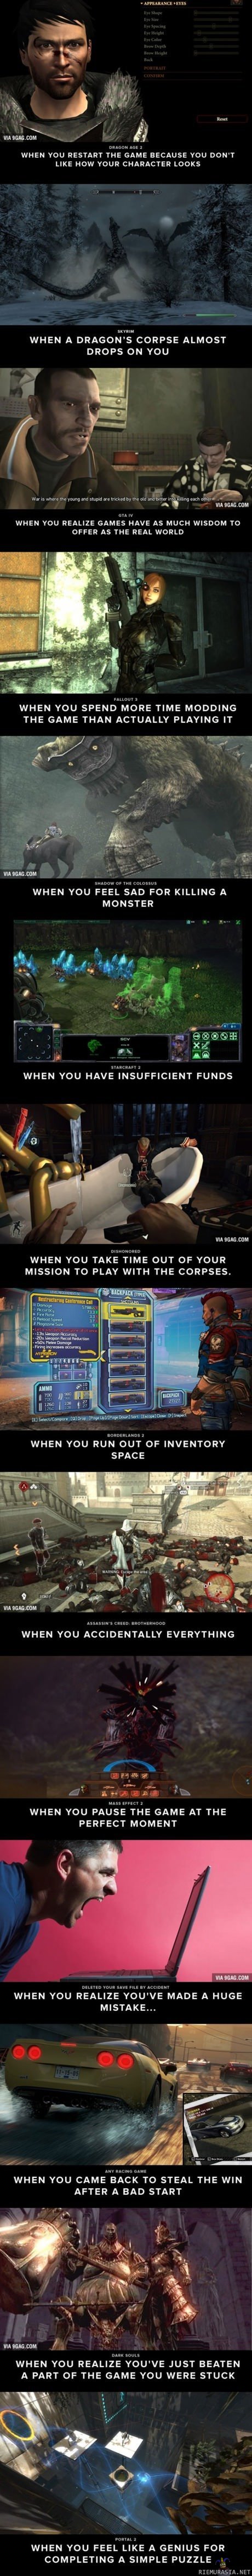 Moments in gaming